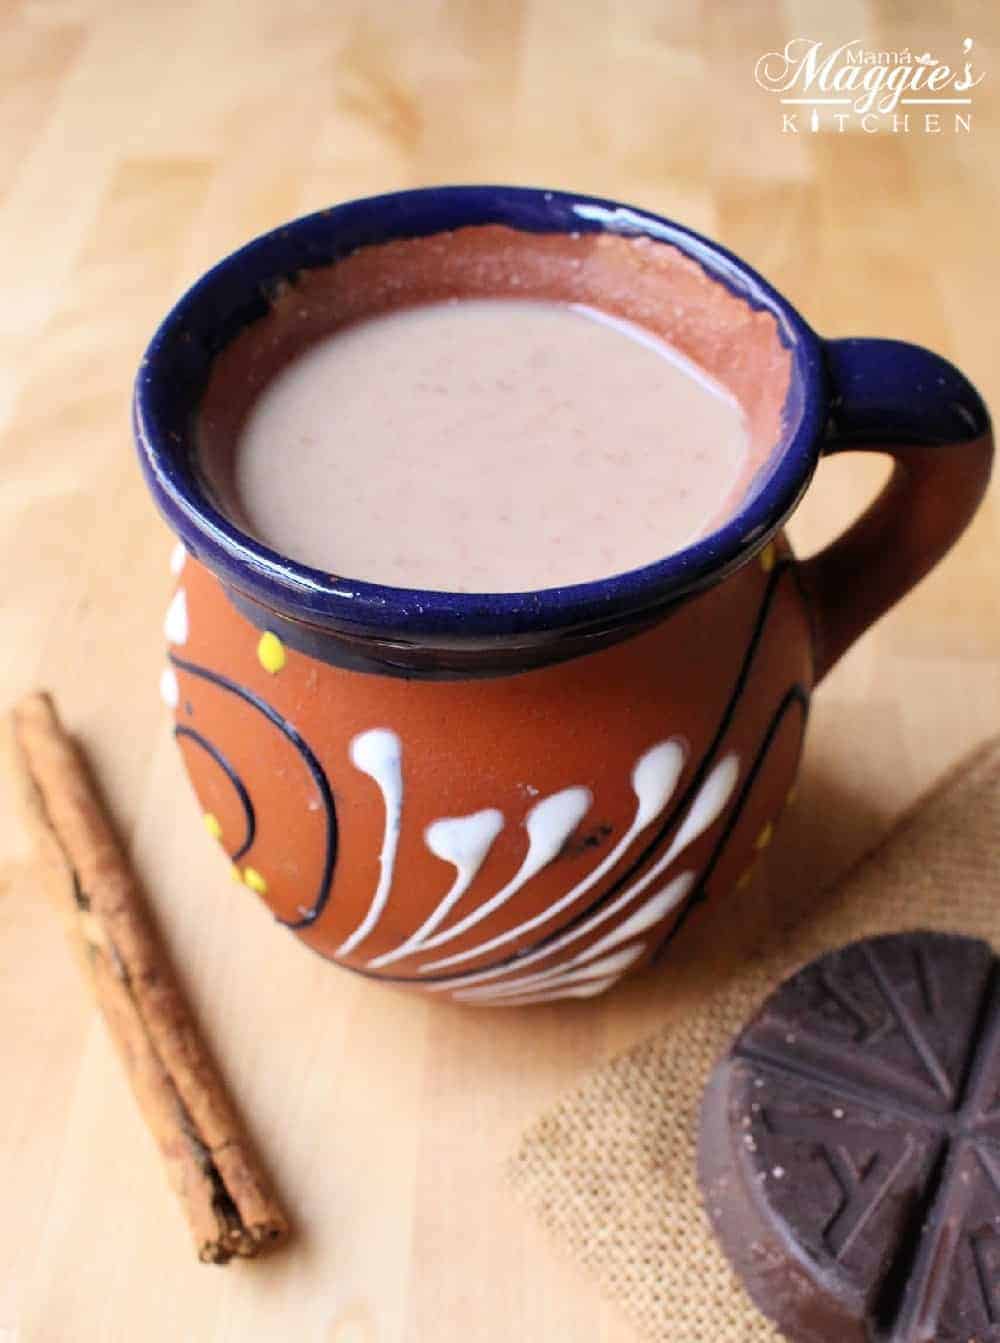 Mexican Champurrado in a decorative, clay cup surrounded by a cinnamon stick and Mexican chocolate tablet.